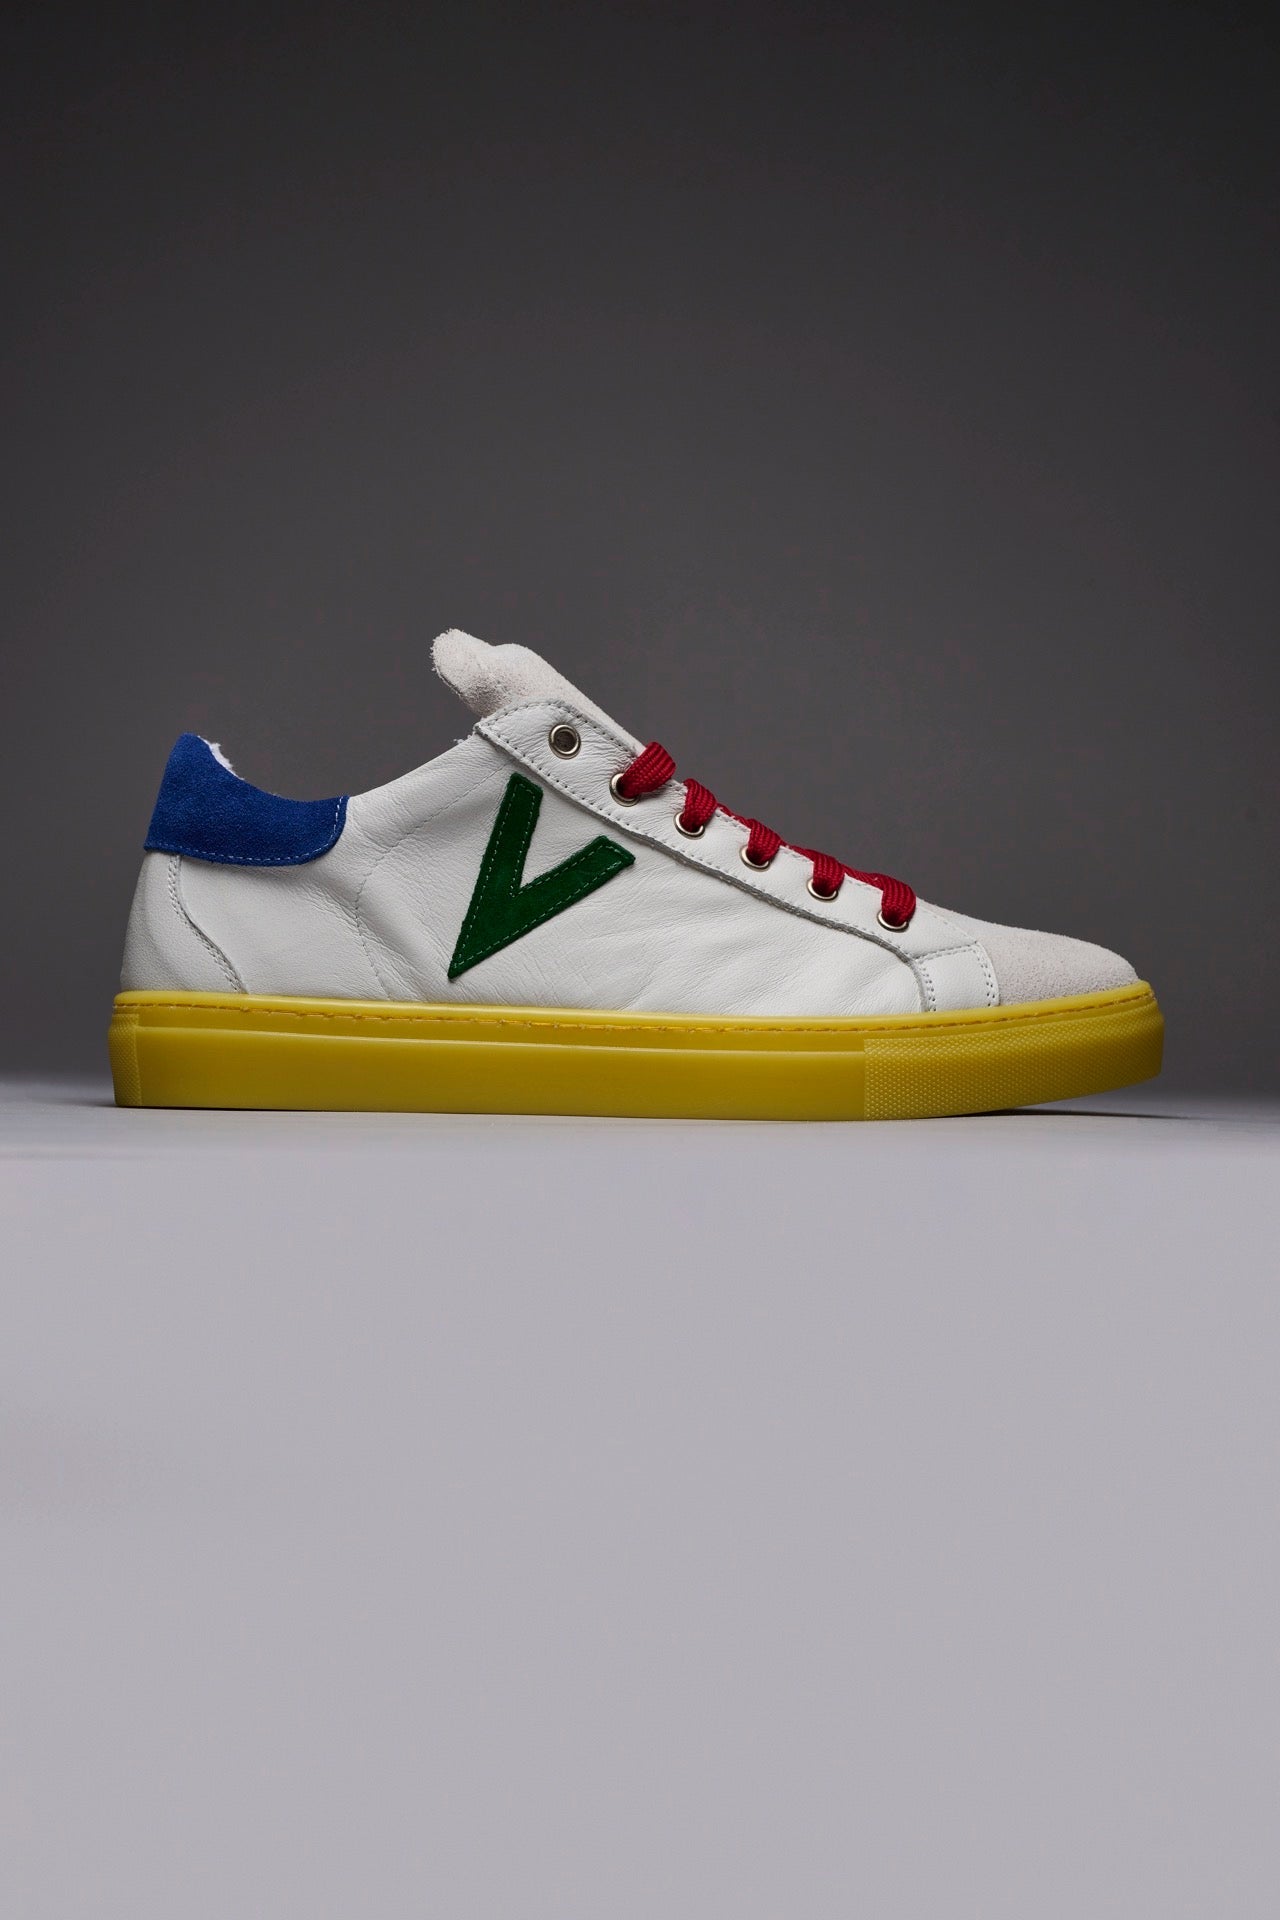 OLYMPIC RAINBOW - Sneakers with yellow sole, multicolor inserts and laces